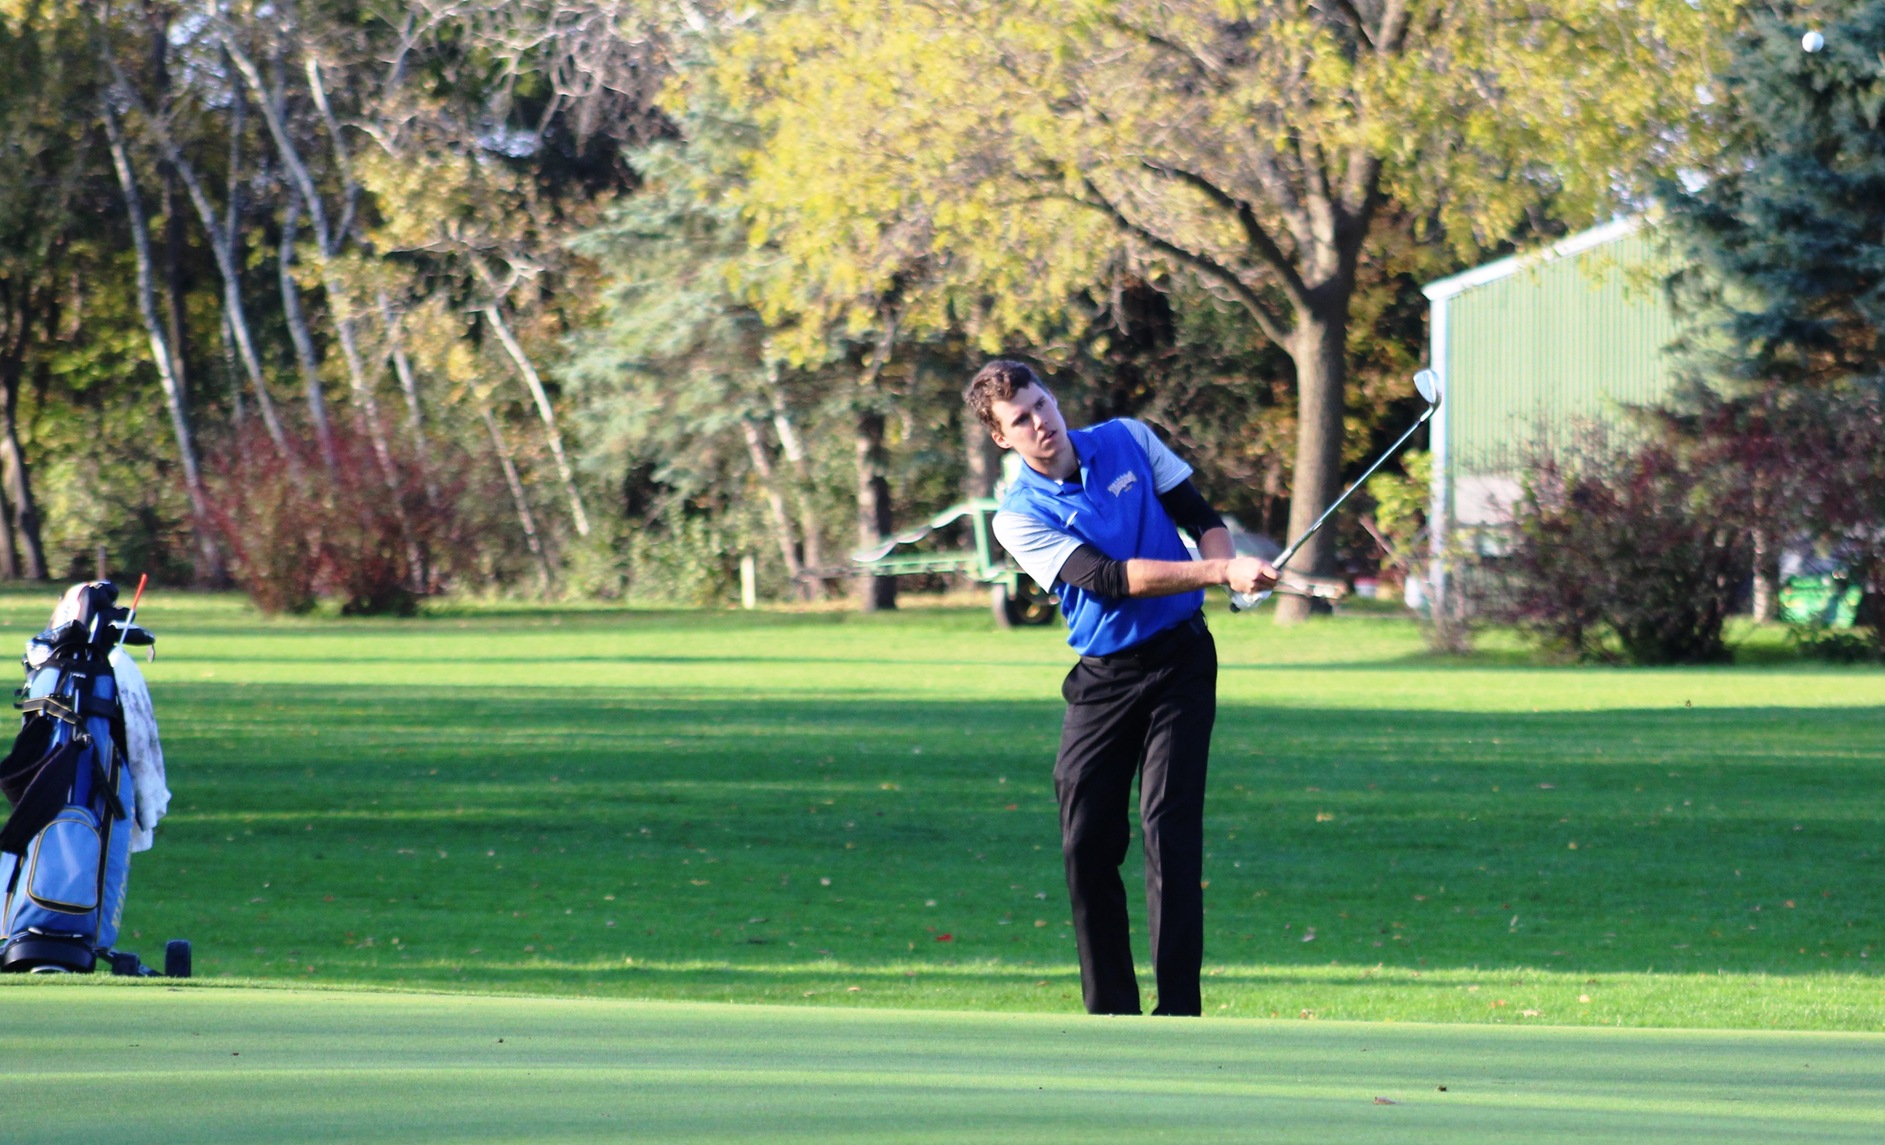 NIACC's Josh Schaefer chips in on the 8th hole (2nd to last hole) for the win against DMACC's Waling/Wierson 2-1 in the third-place match at the Quad Cup.